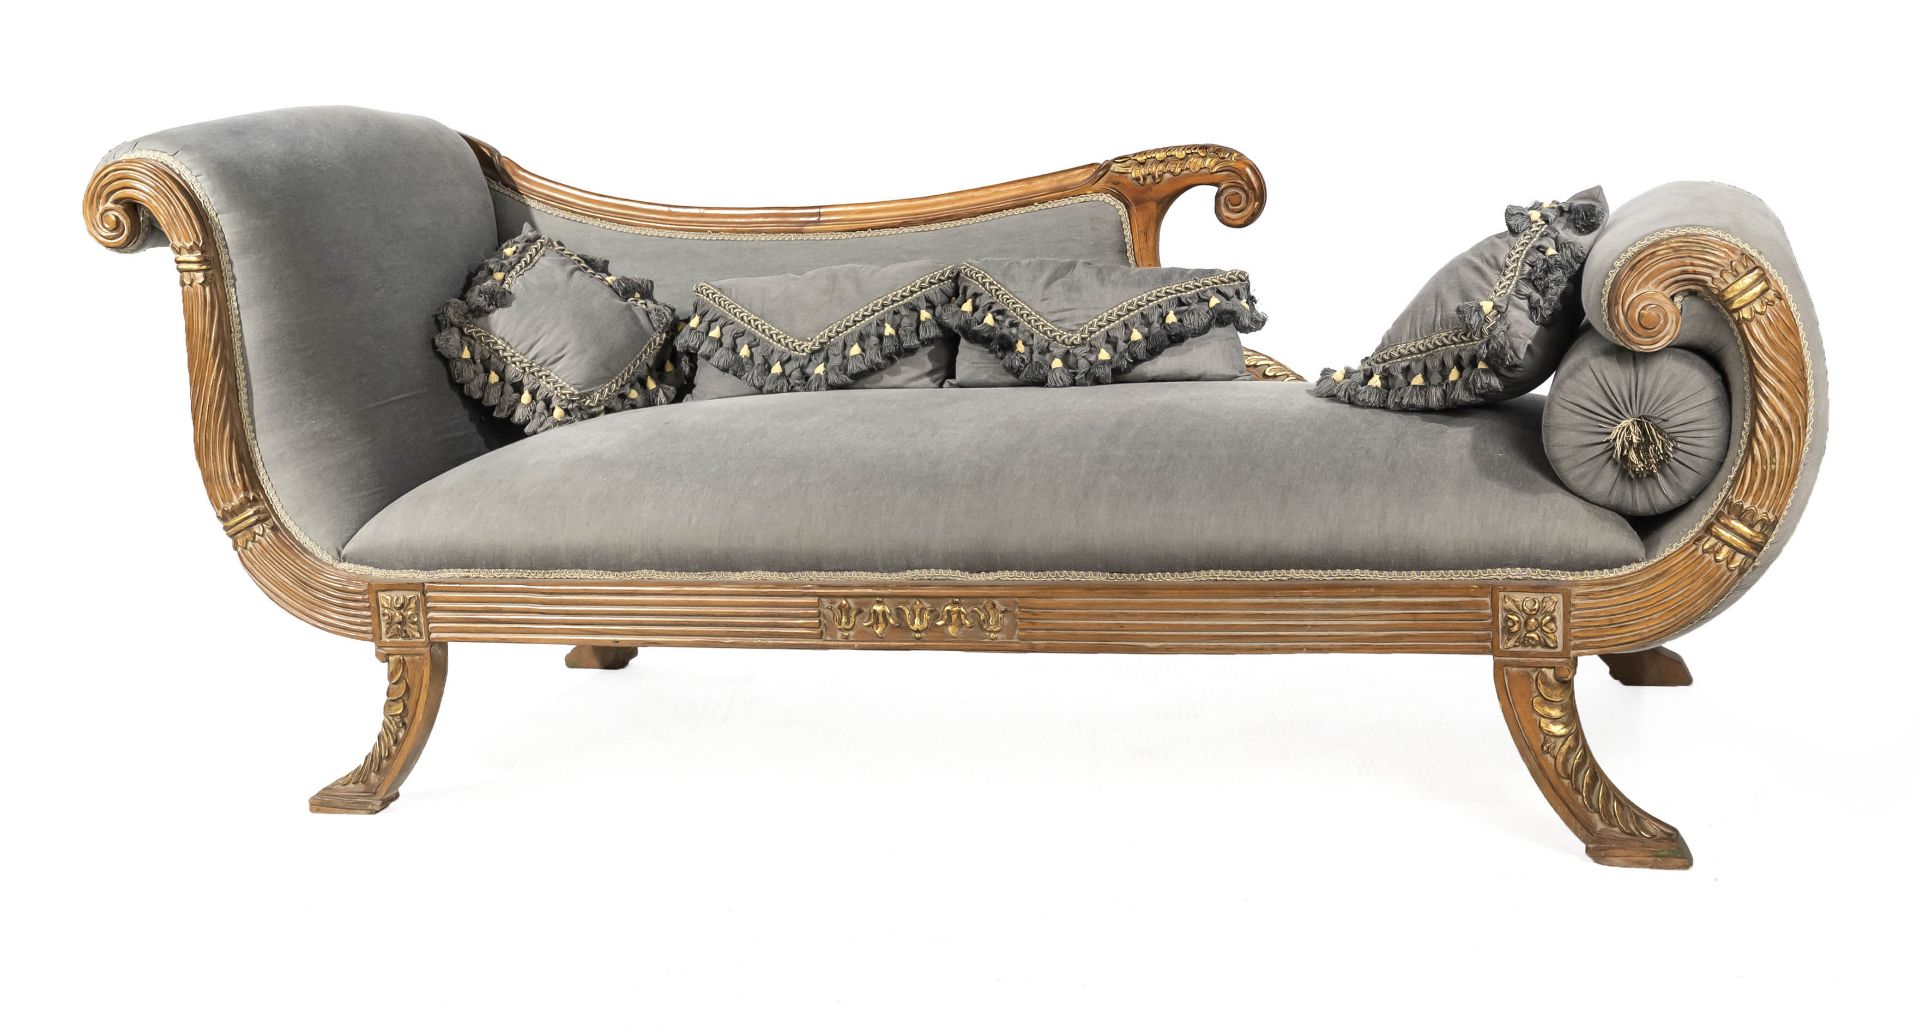 Decorative Empire-style chaise longue, late 20th century, solid beech, carved and partly gold-